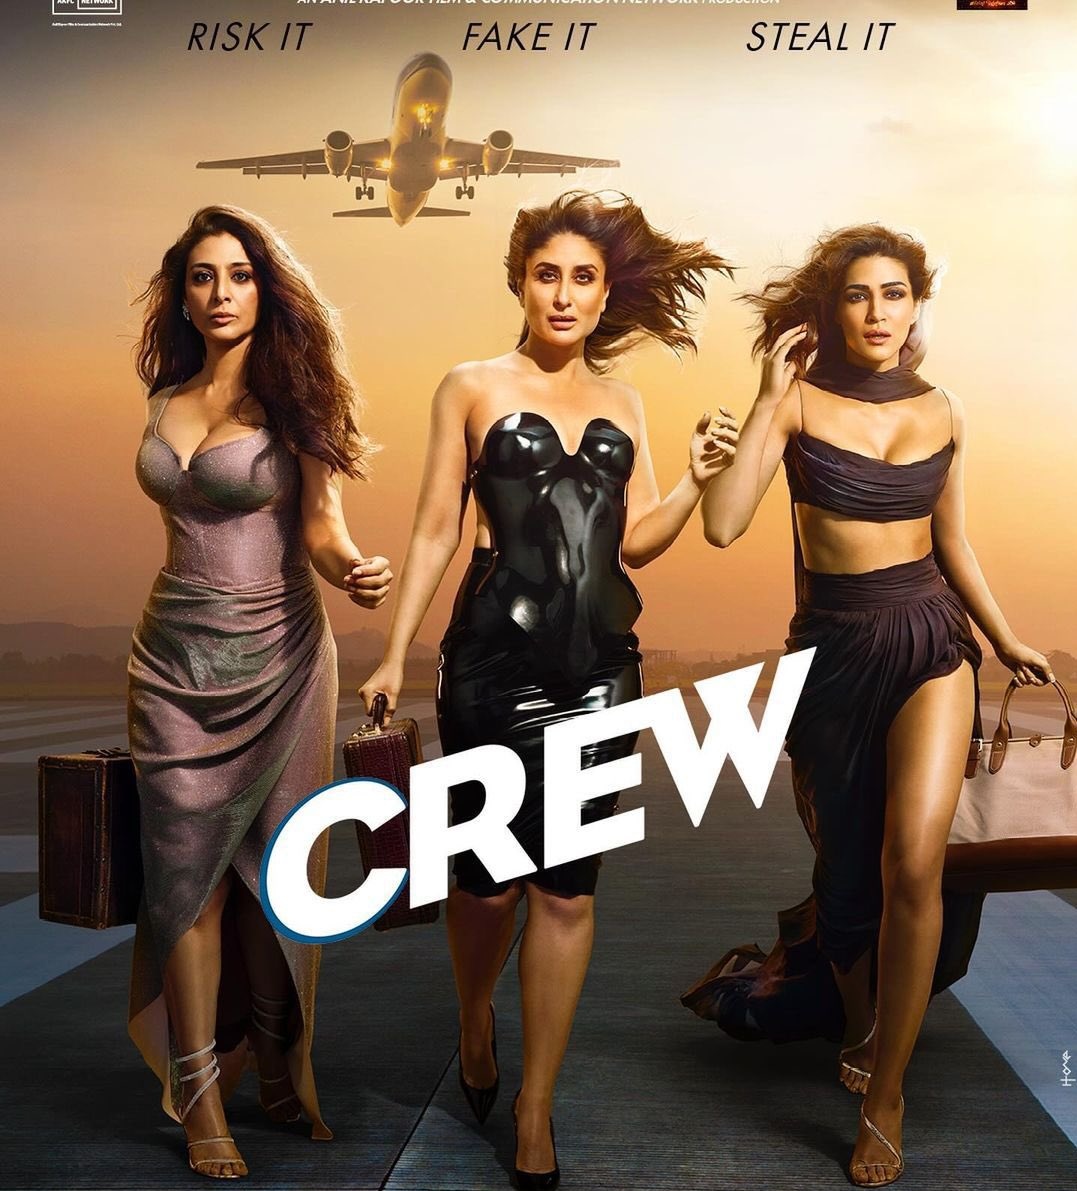 #Crew was so freaking good and entertaining. Not a single dull moment. Kriti, Kareena and Tabu ate and left no crumbs.

#CrewReview